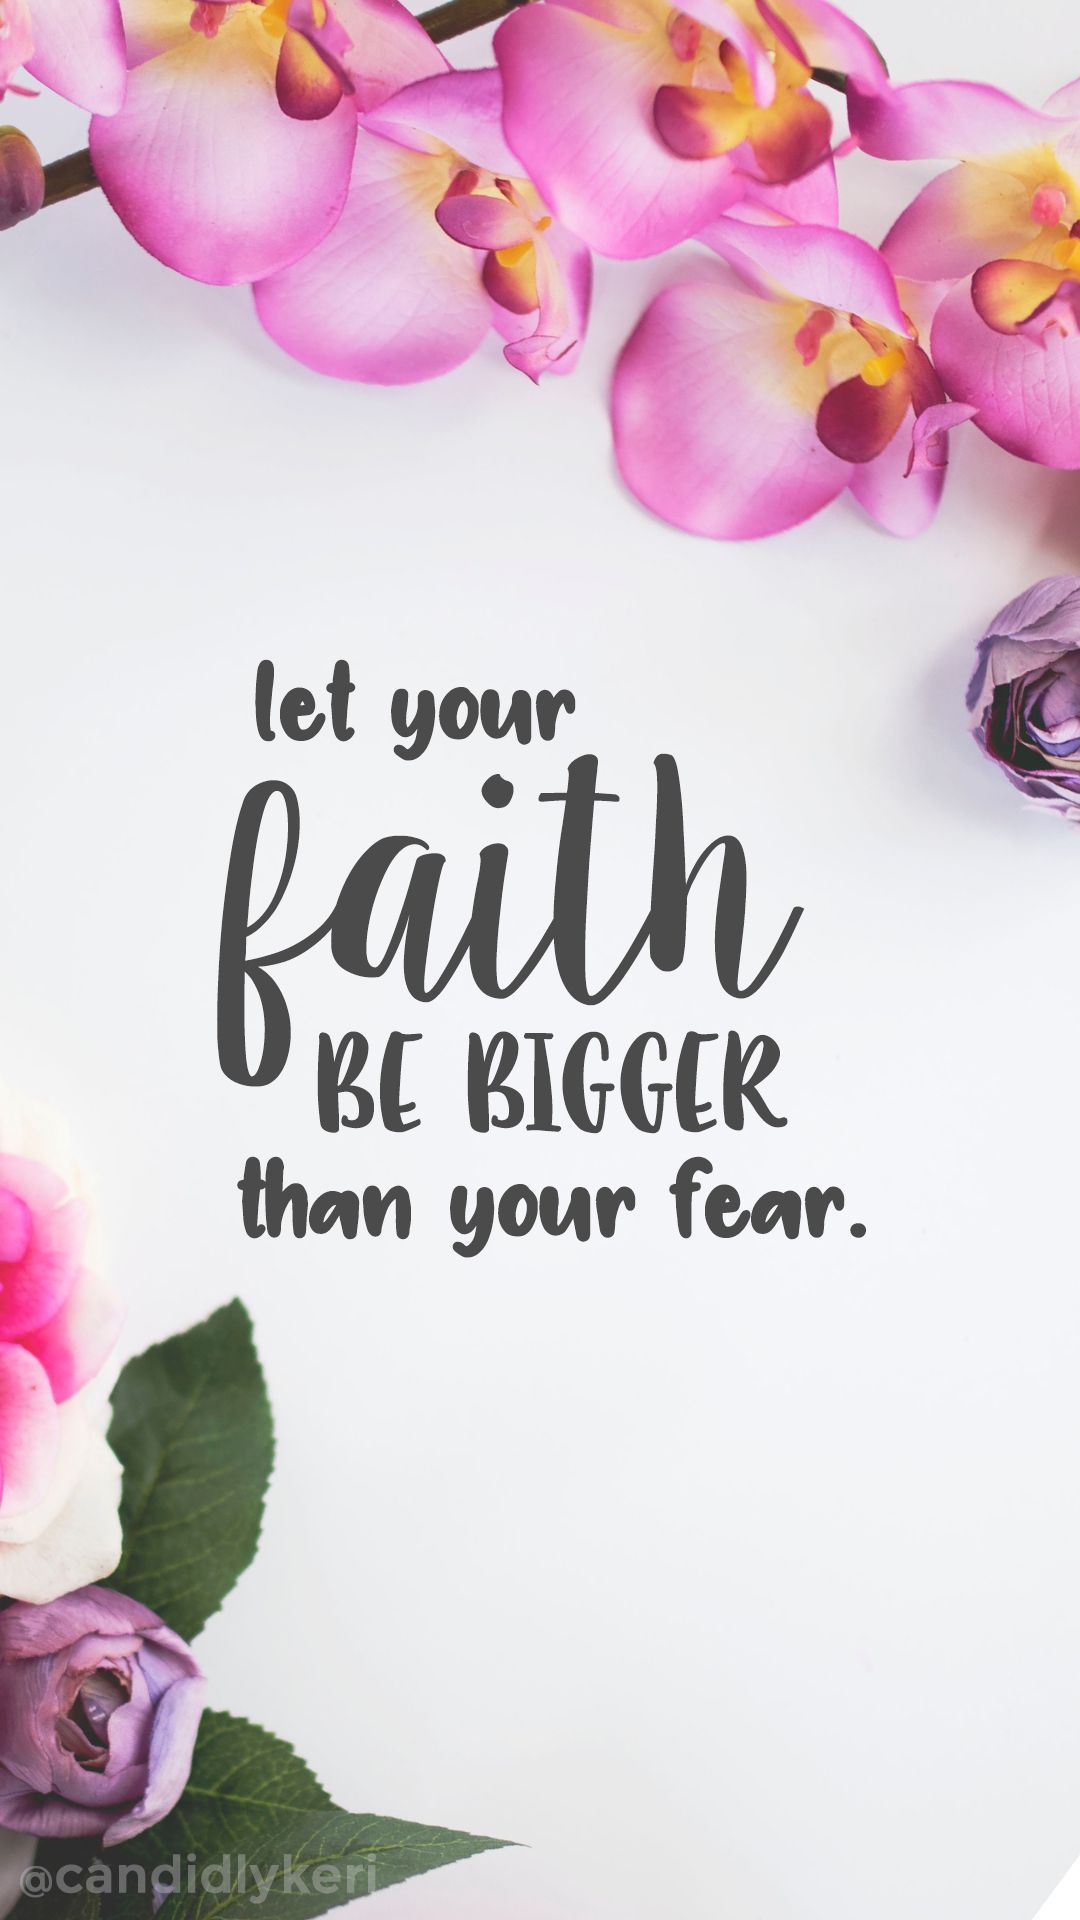 Let your faith be bigger than your fear quote flower floral wallpaper you can download for free on. Flower quotes, Wallpaper iphone quotes, Bible verse wallpaper